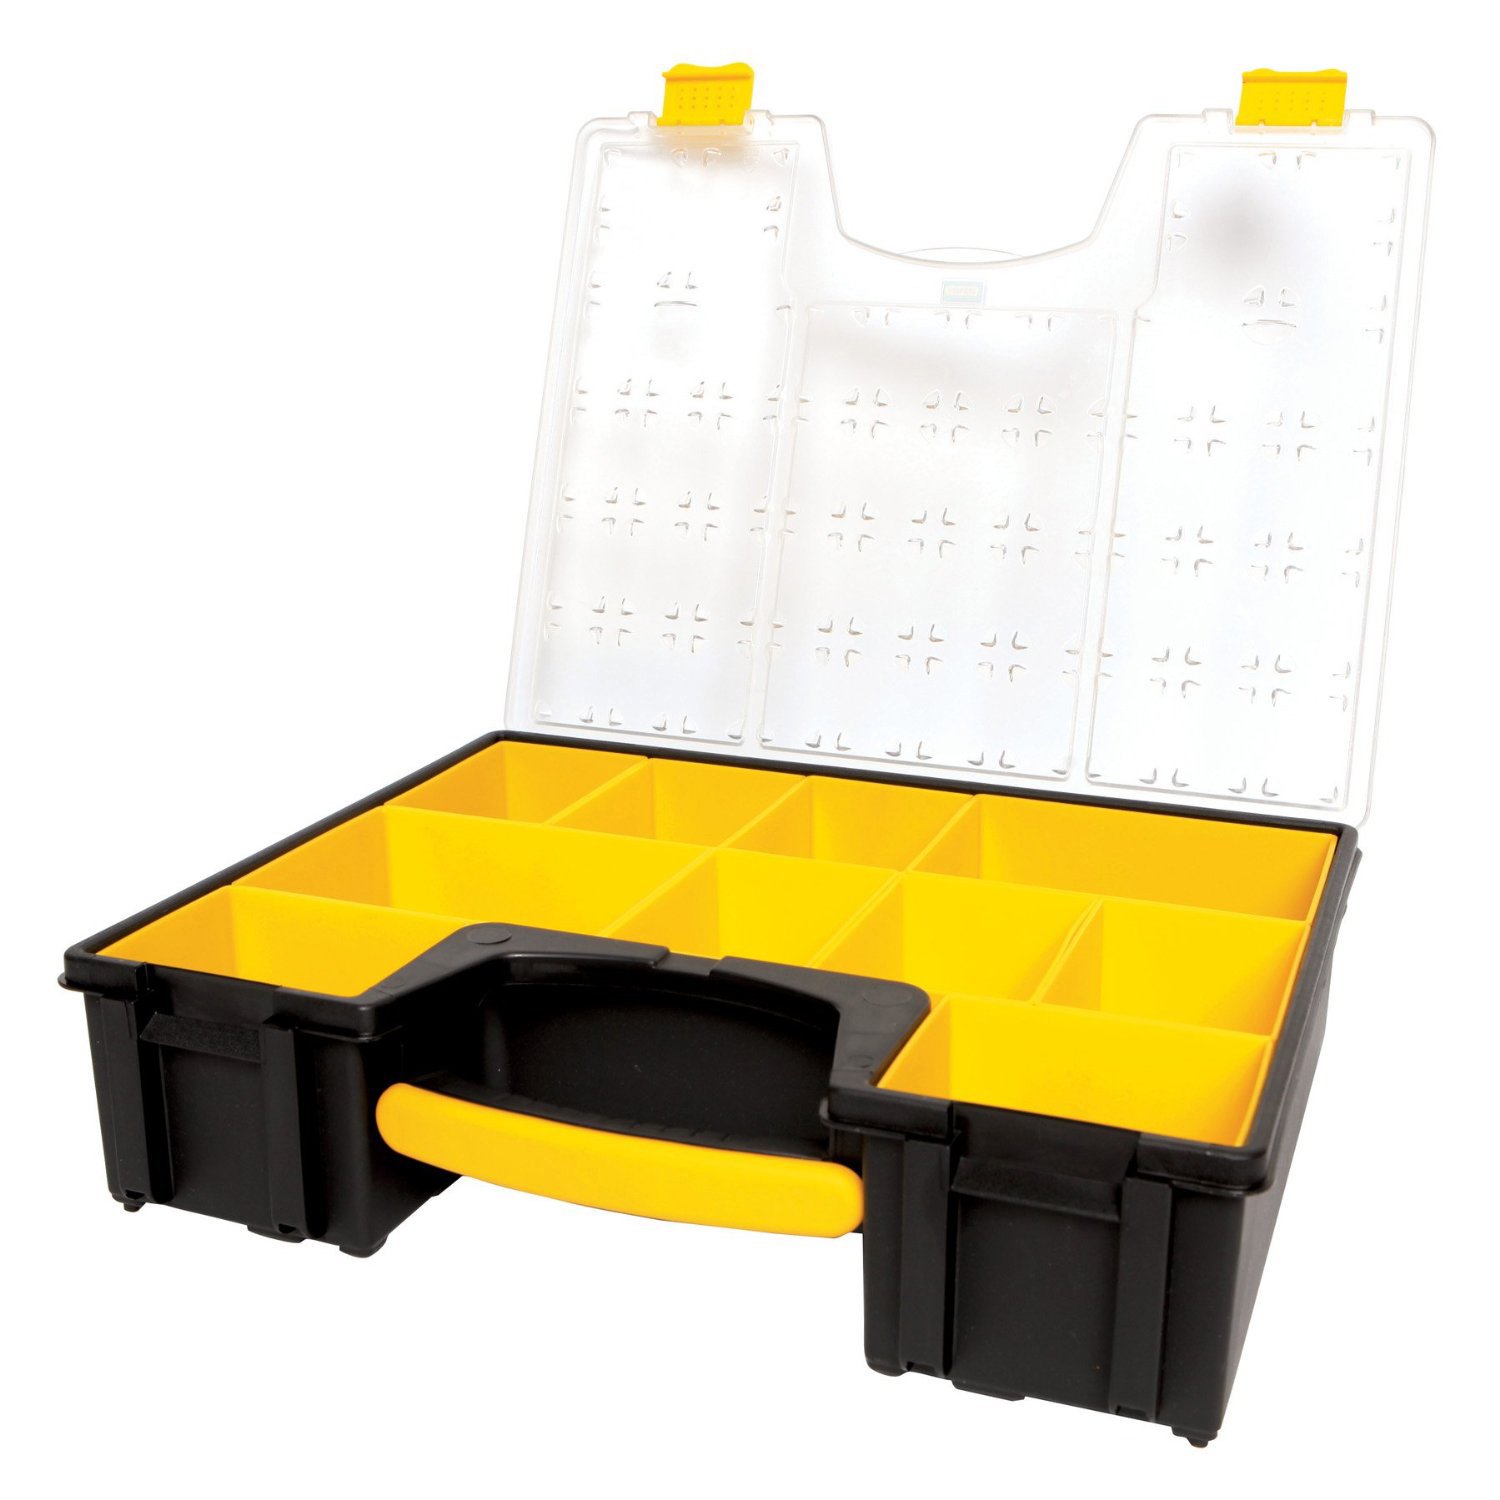 STANLEY 014710R Deep Organizer Professional， 10 Compartments